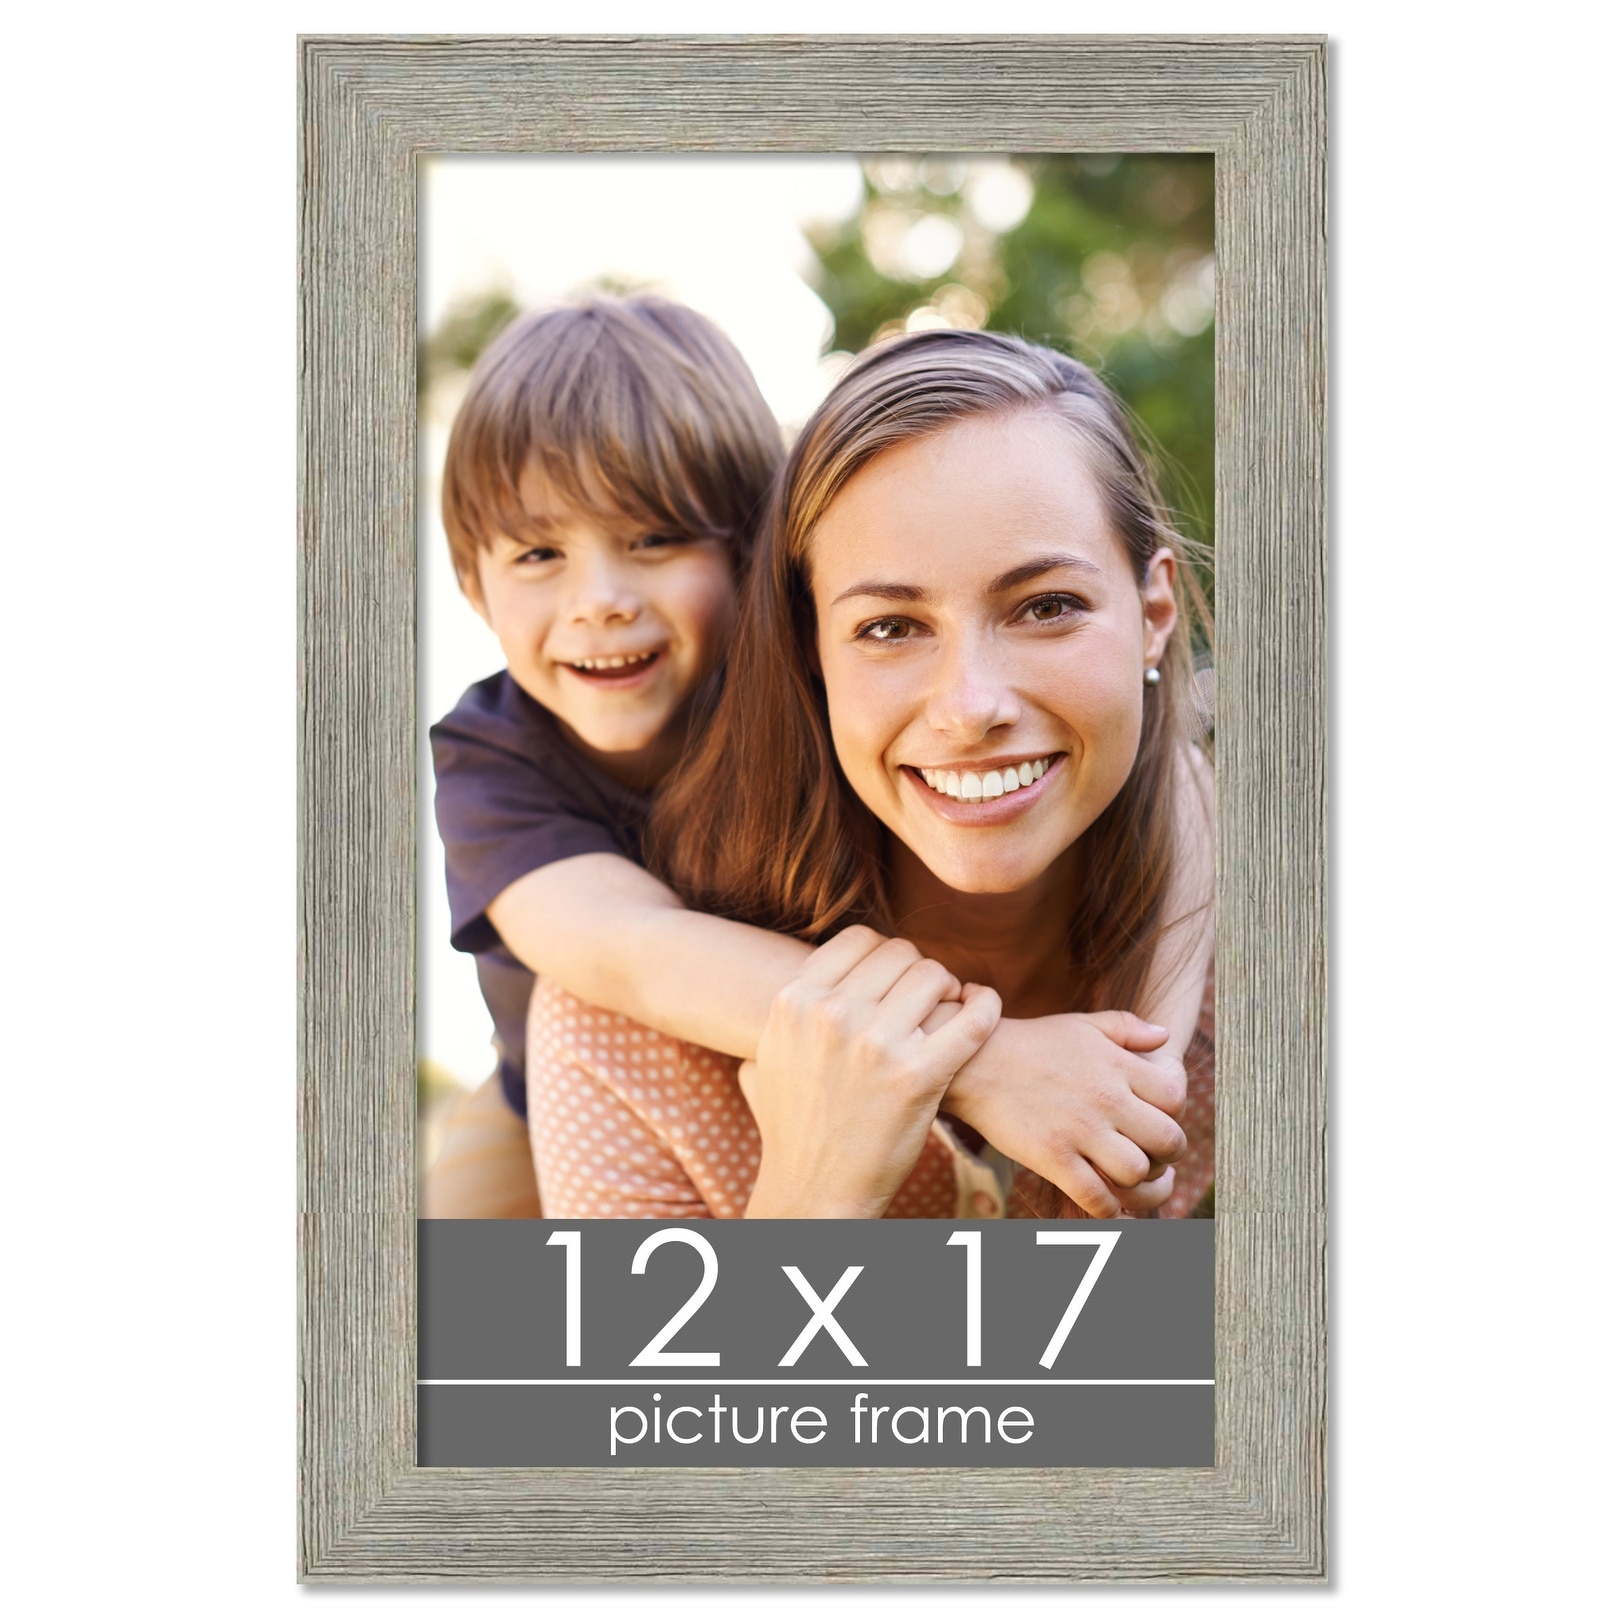 12x17 Distressed/Aged Contrast Grey Complete Wood Picture Frame with UV Acrylic, Foam Board Backing, & Hardware